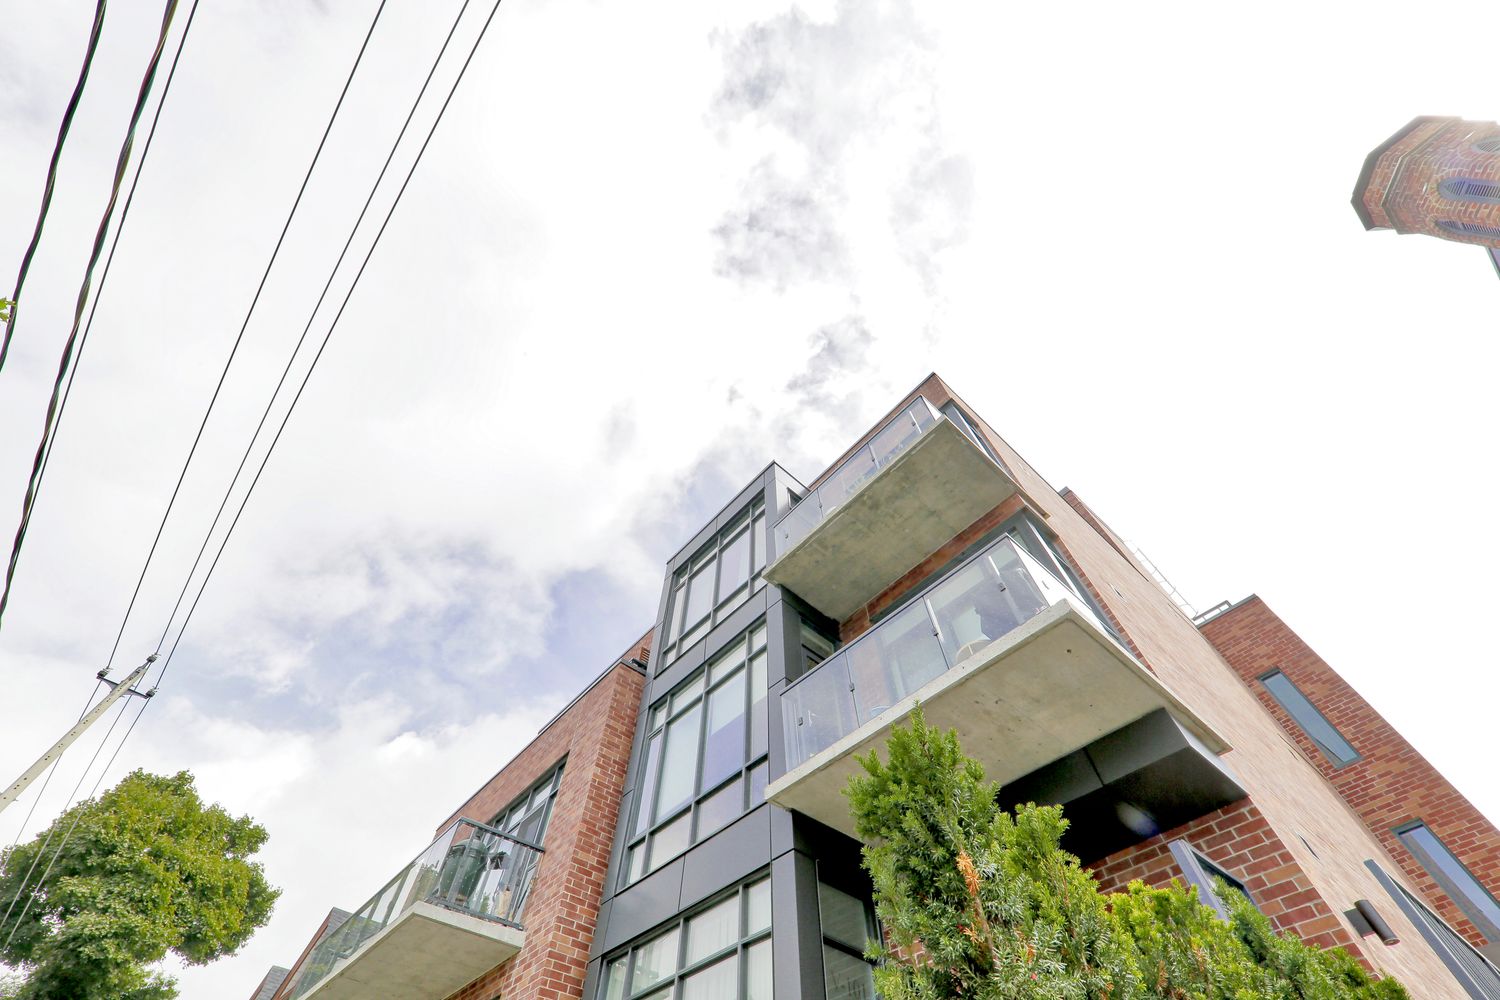 245 Perth Avenue. Arch Lofts is located in  West End, Toronto - image #3 of 5